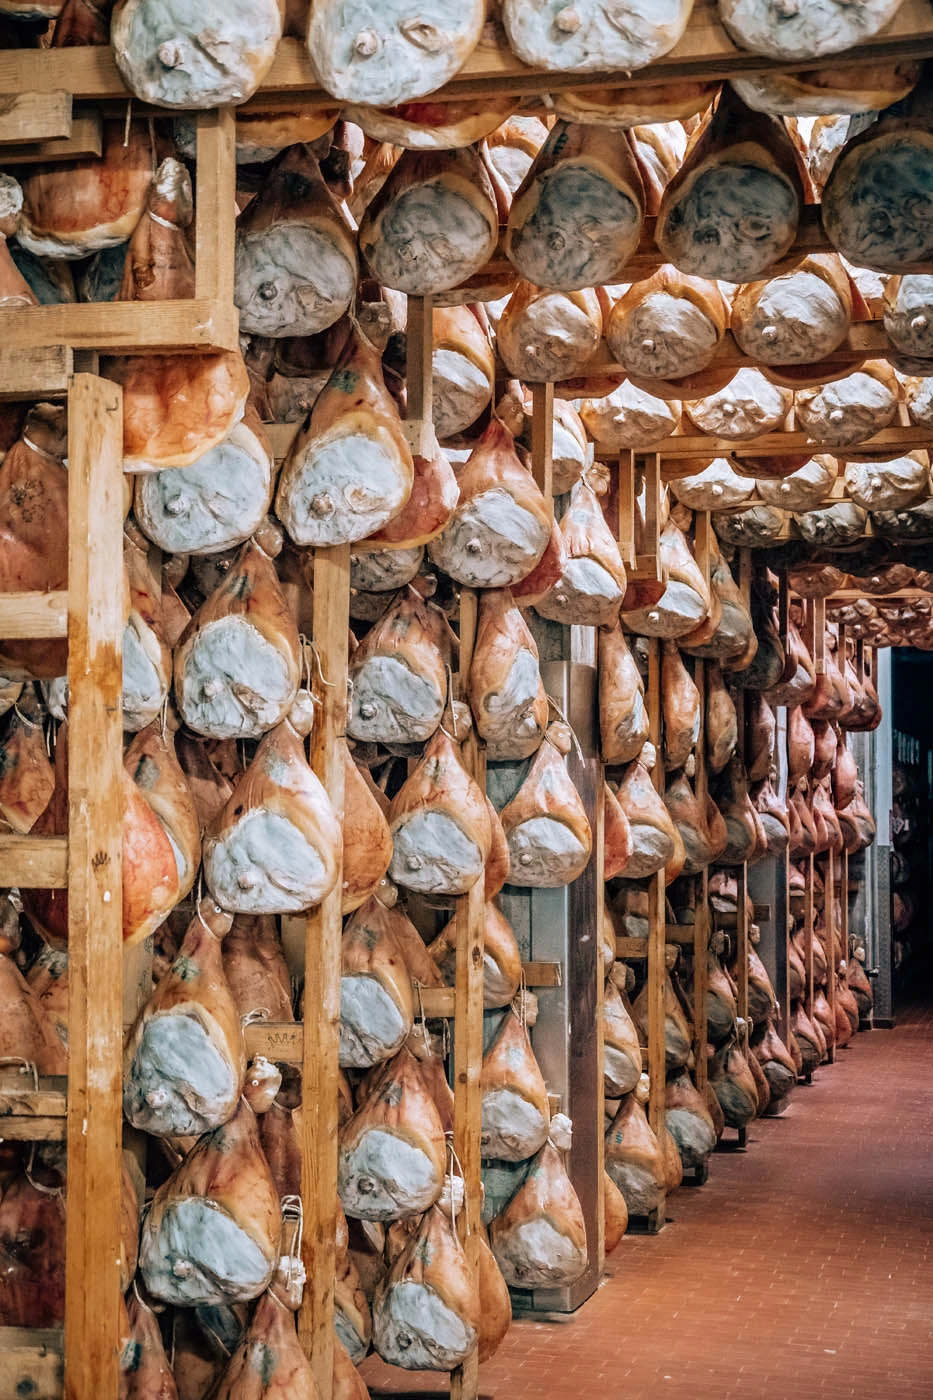 BEST Things to do in Parma Italy - Prosciutto di Parma Food tour - Aging racks